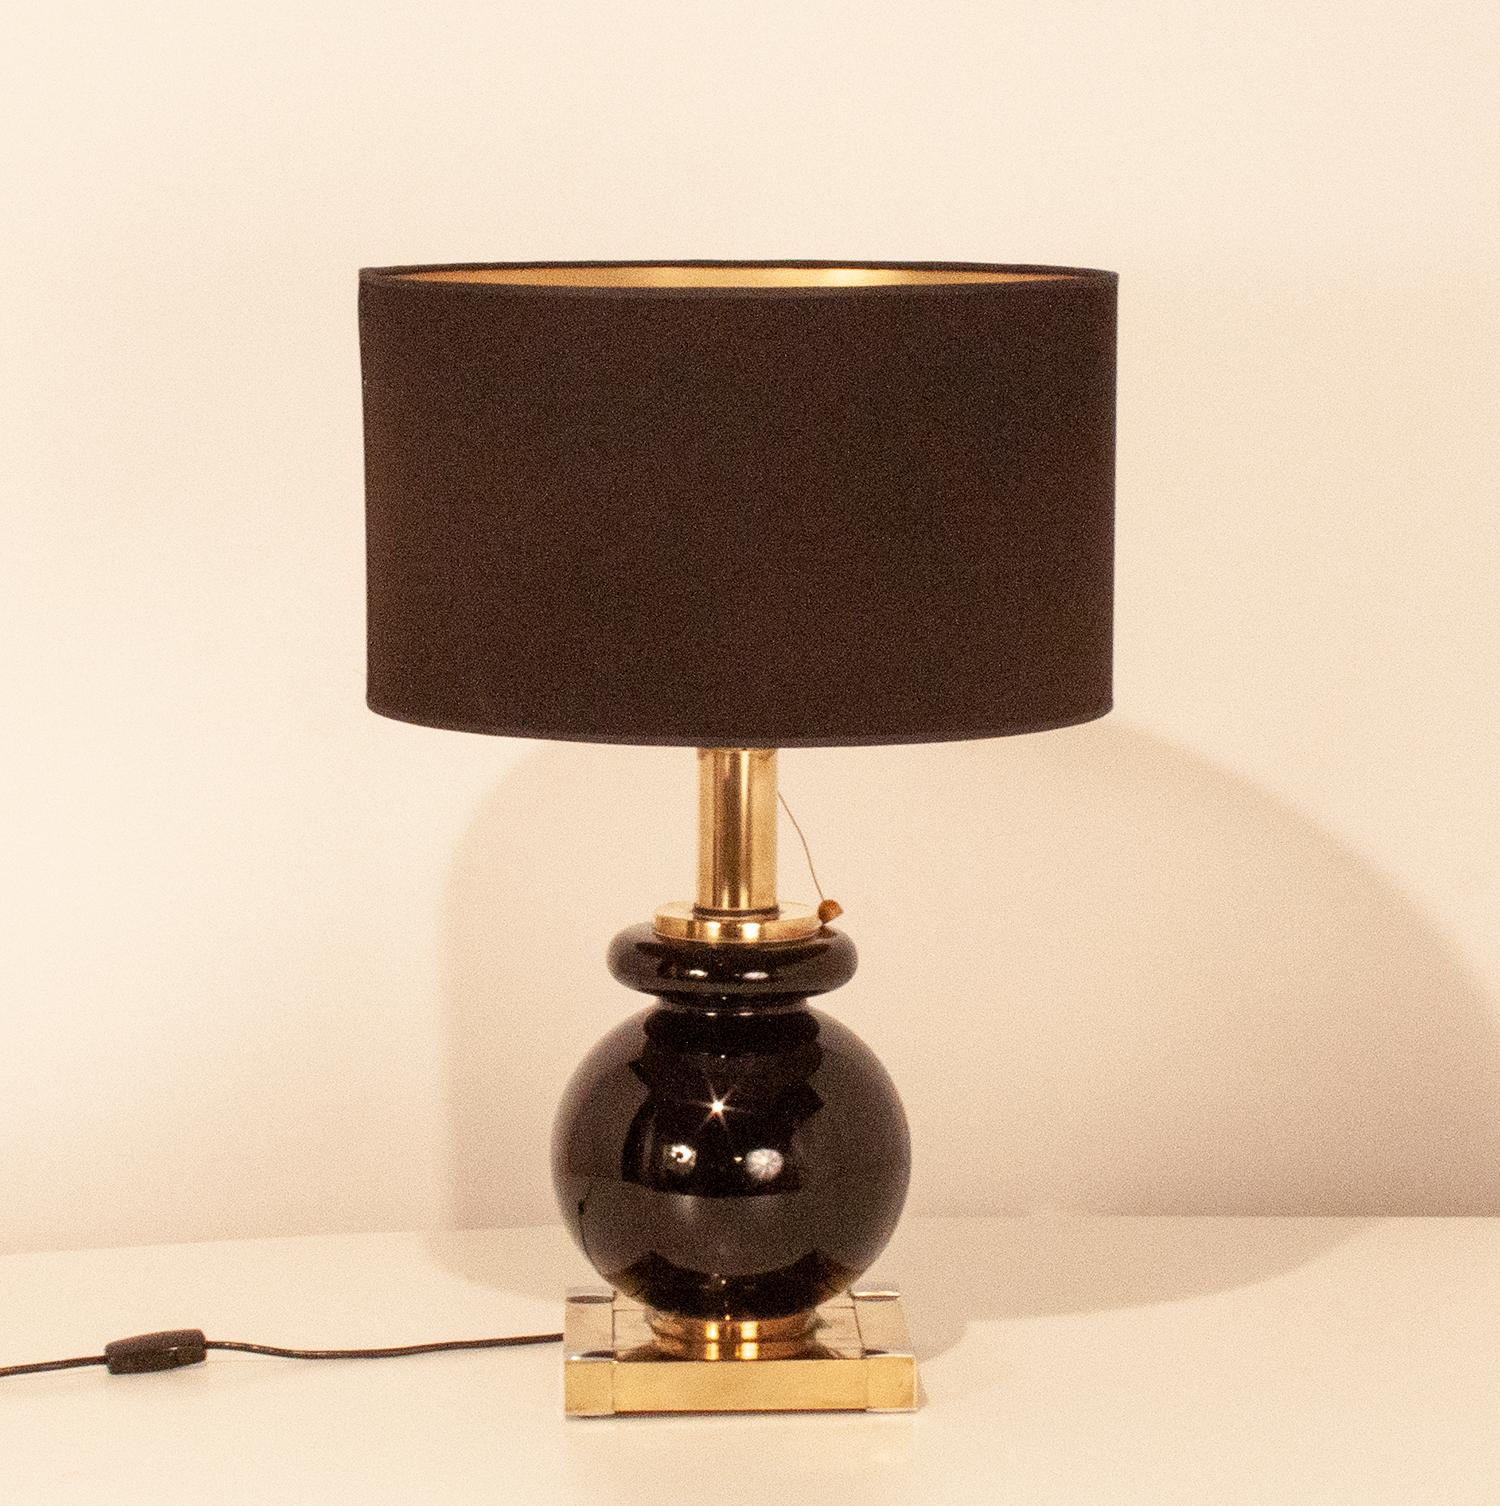 Spanish Midcentury Table Lamp Designed by Willy Rizzo, 1970s for Lumica, Spain, Brass For Sale